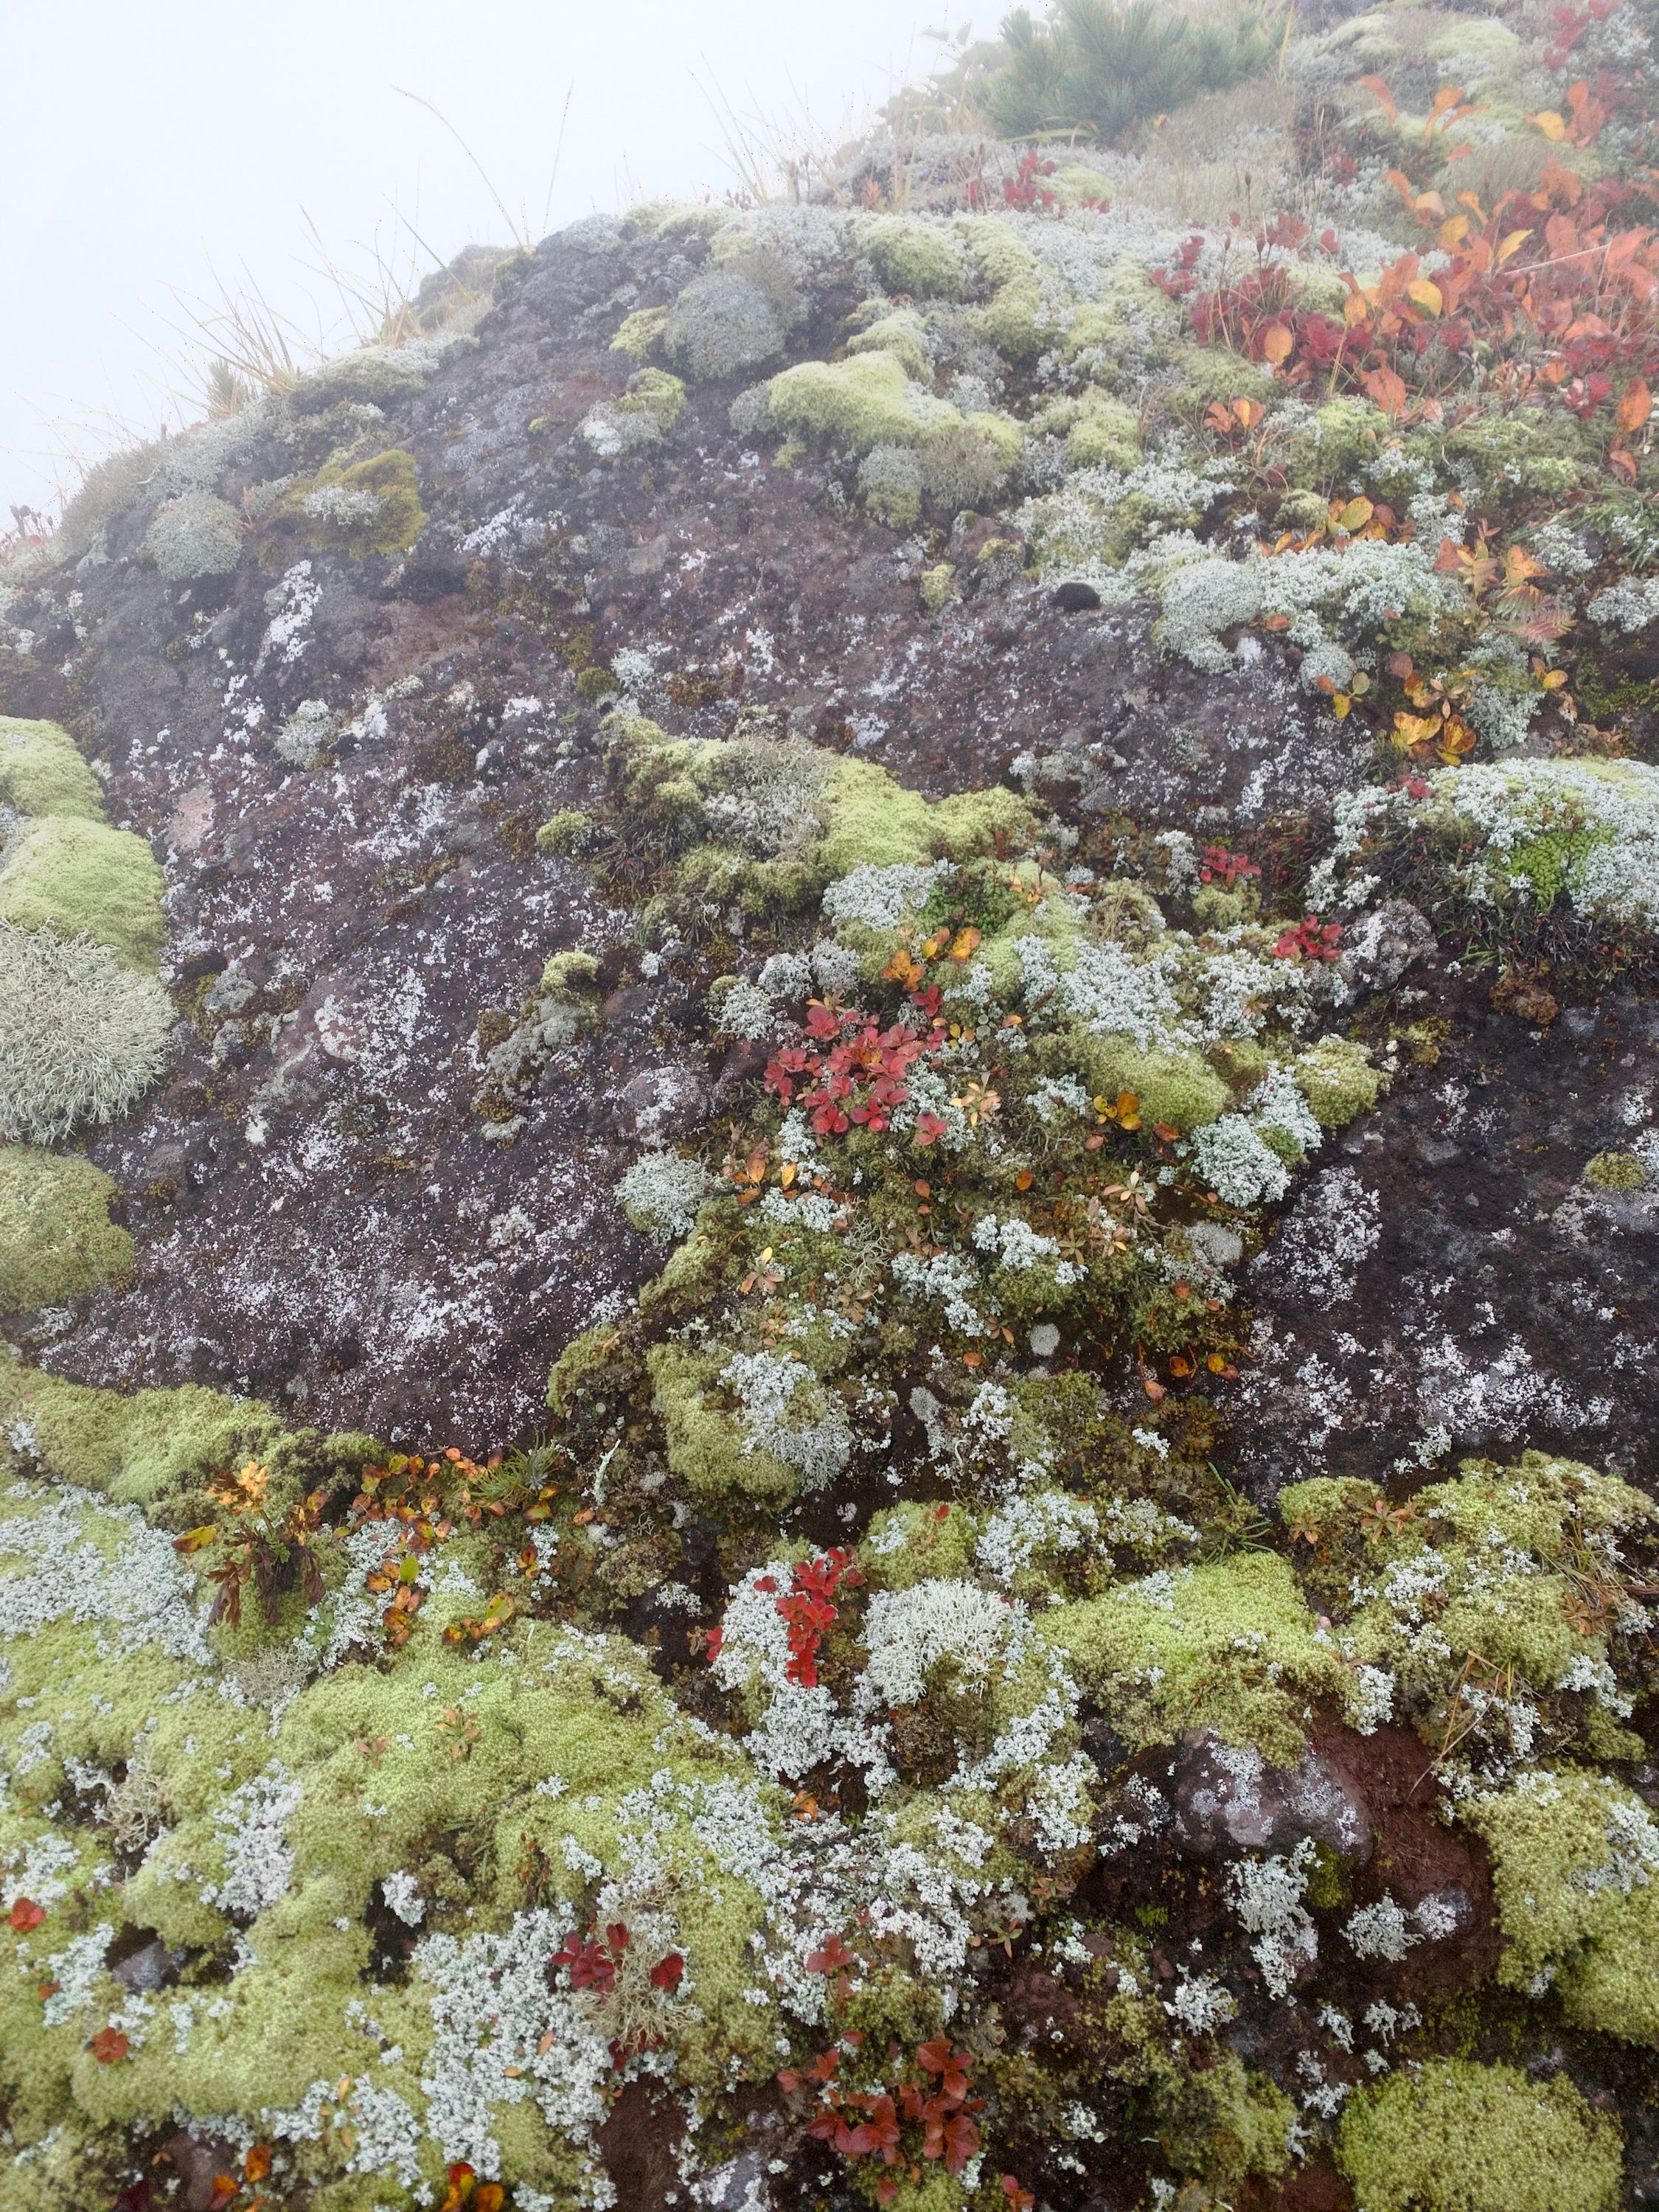 Closeup of moss, lichen, and some small red-leafed plants growing on a black volcanic rock